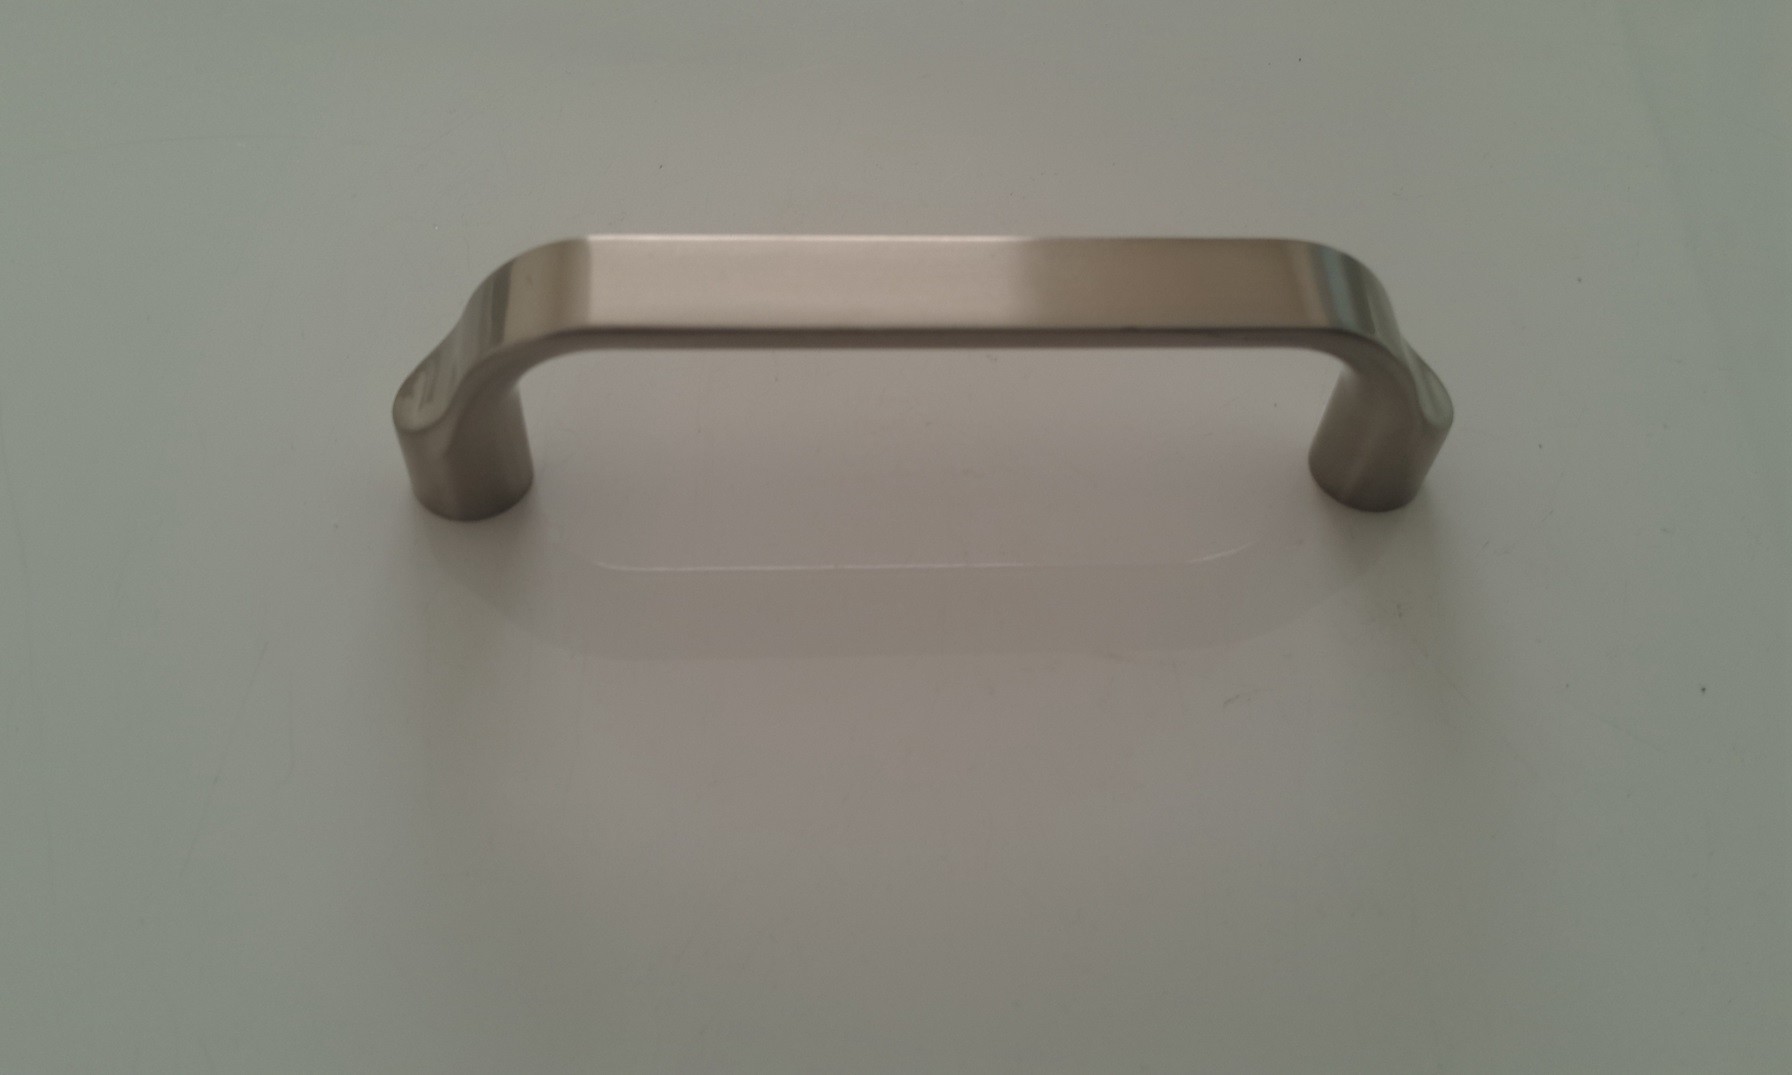 Zinc Alloy Furniture Handles And Pulls Metal Hardware For